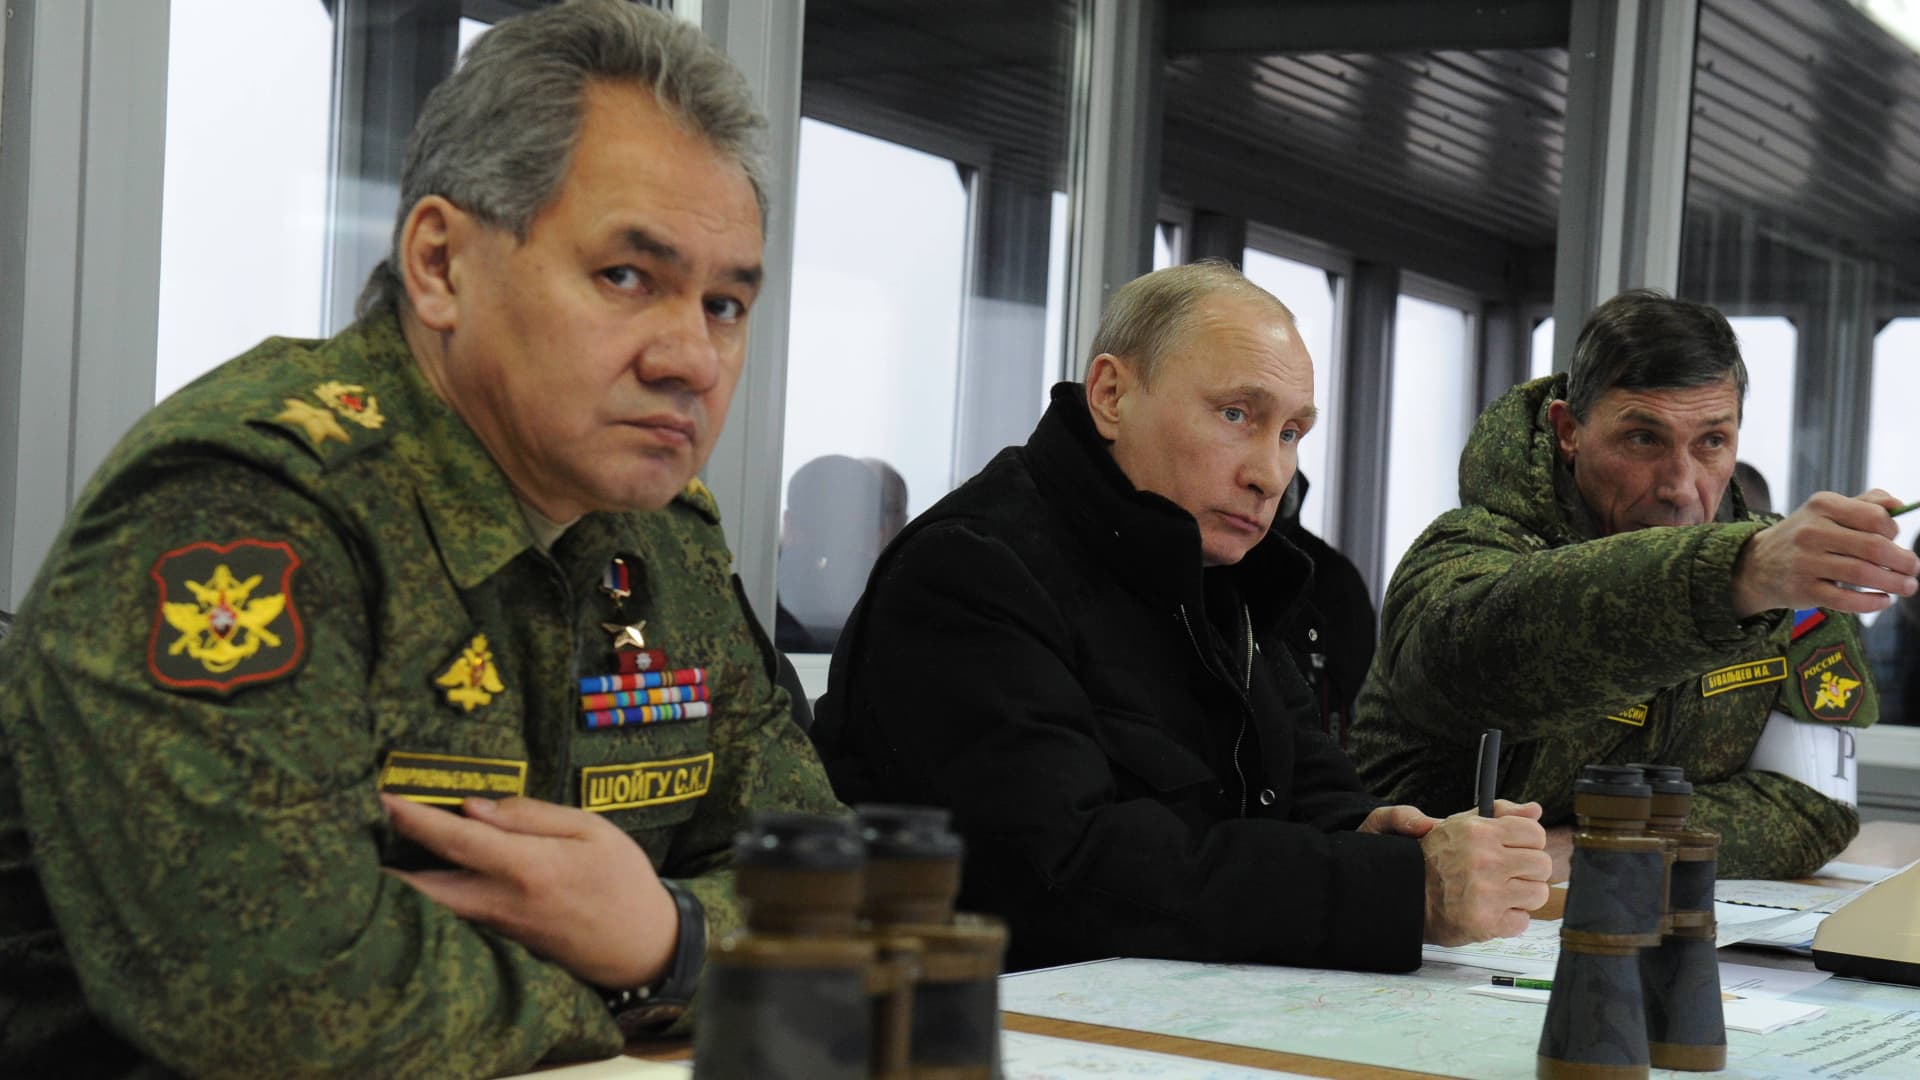 Russia's President Vladimir Putin (C) listens to the head of the Russian army's main department of combat preparation Ivan Buvaltsev (R) while watching military exercises at the Kirillovsky firing ground in the Leningrad region, on March 3, 2014, with Defence Minister Sergei Shoigu (L)attending.